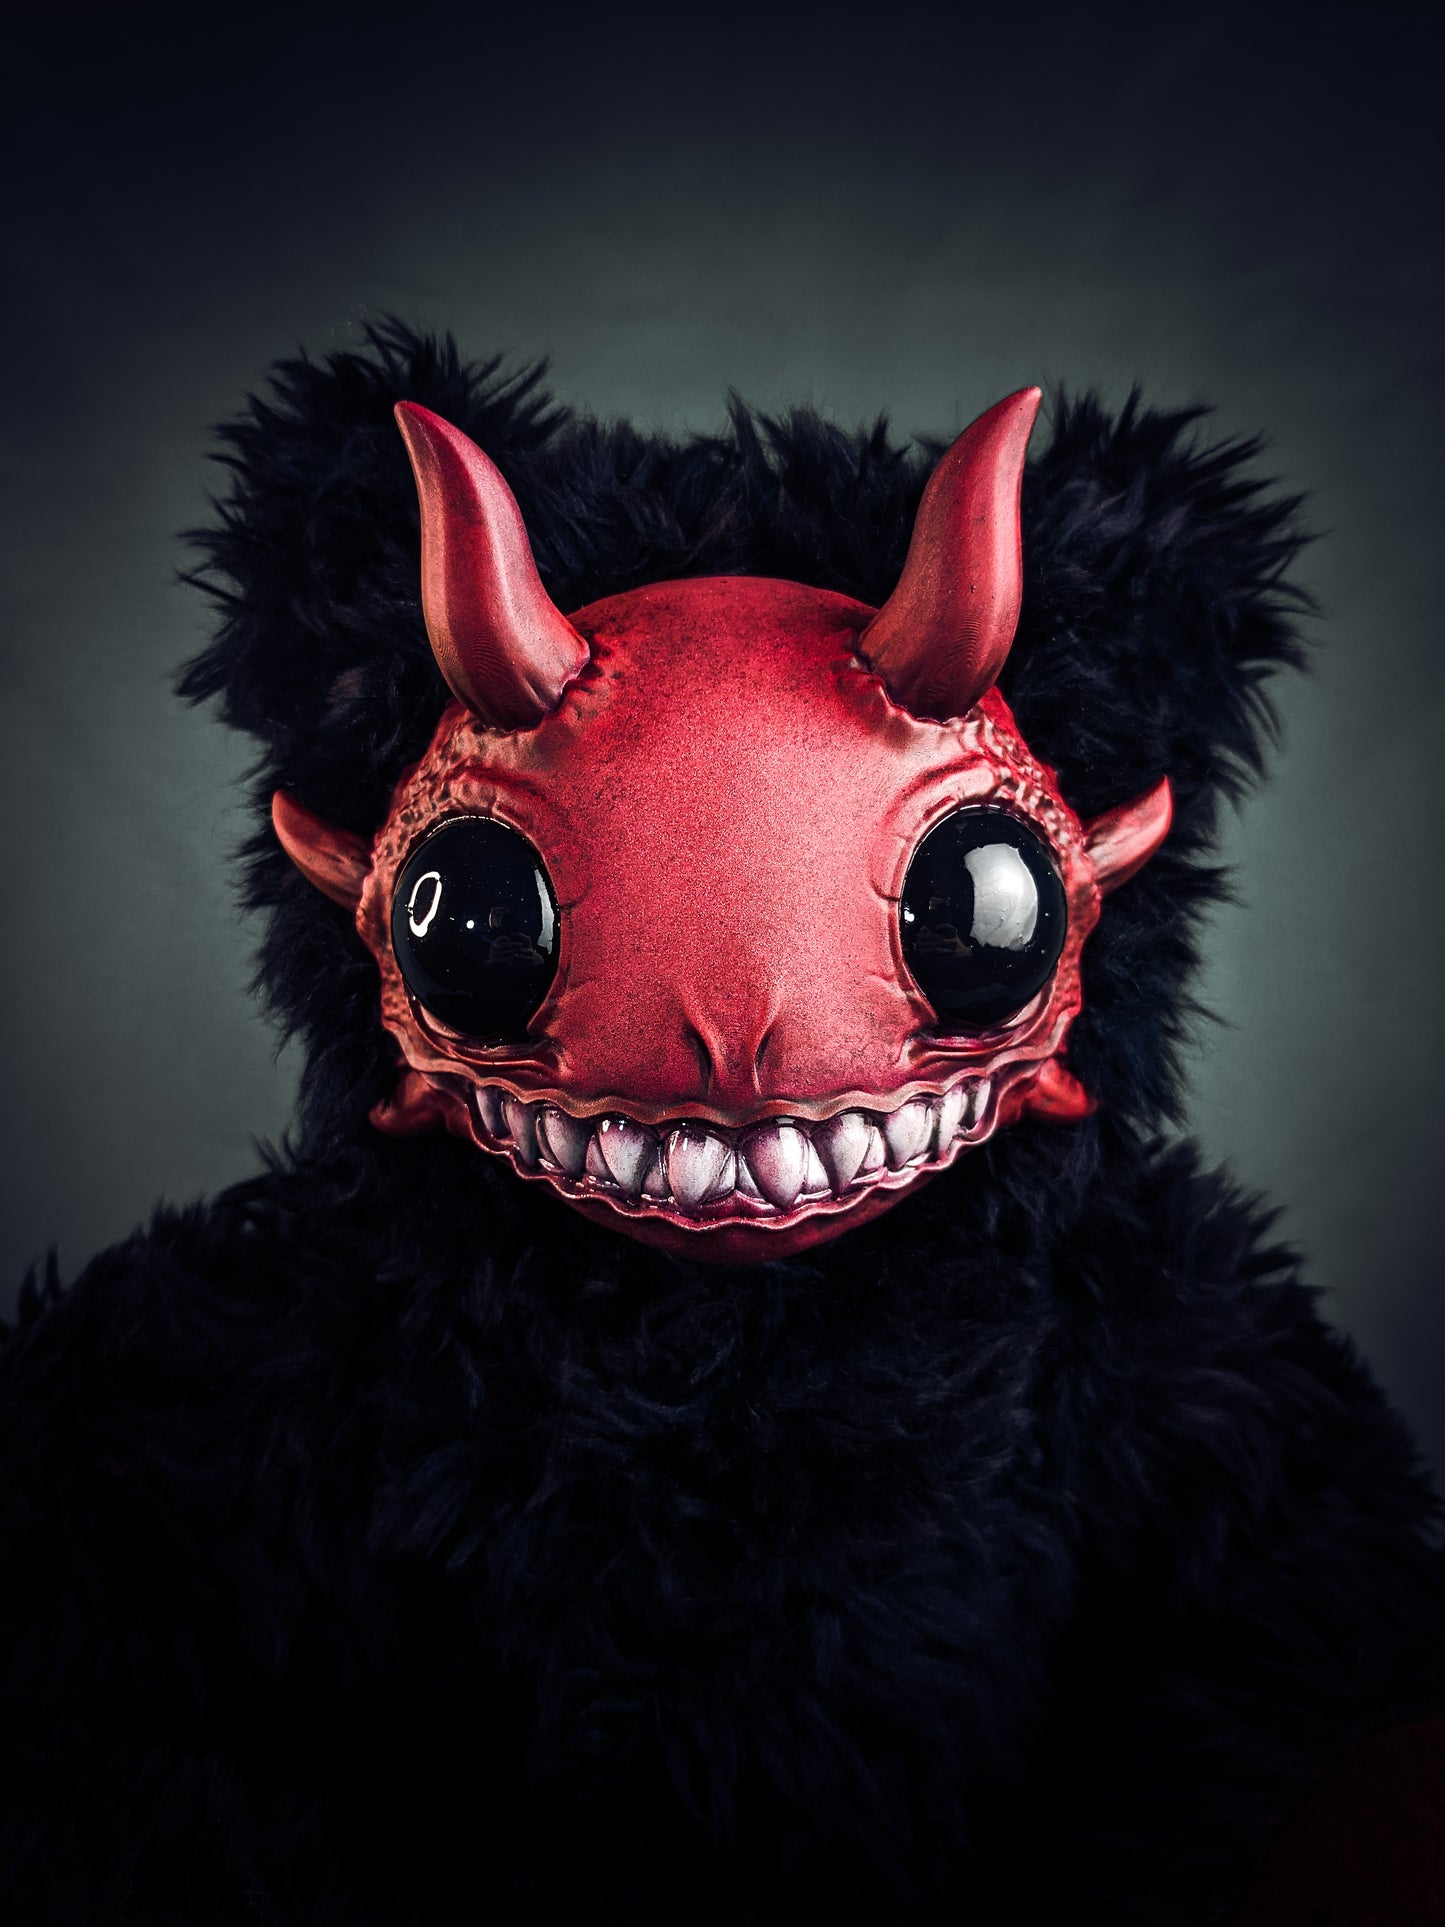 Abyssal Delight: REEFUL - CRYPTCRITZ Handcrafted Deep Sea Demon Art Doll Plush Toy for Dark Enchantresses of the Abyss